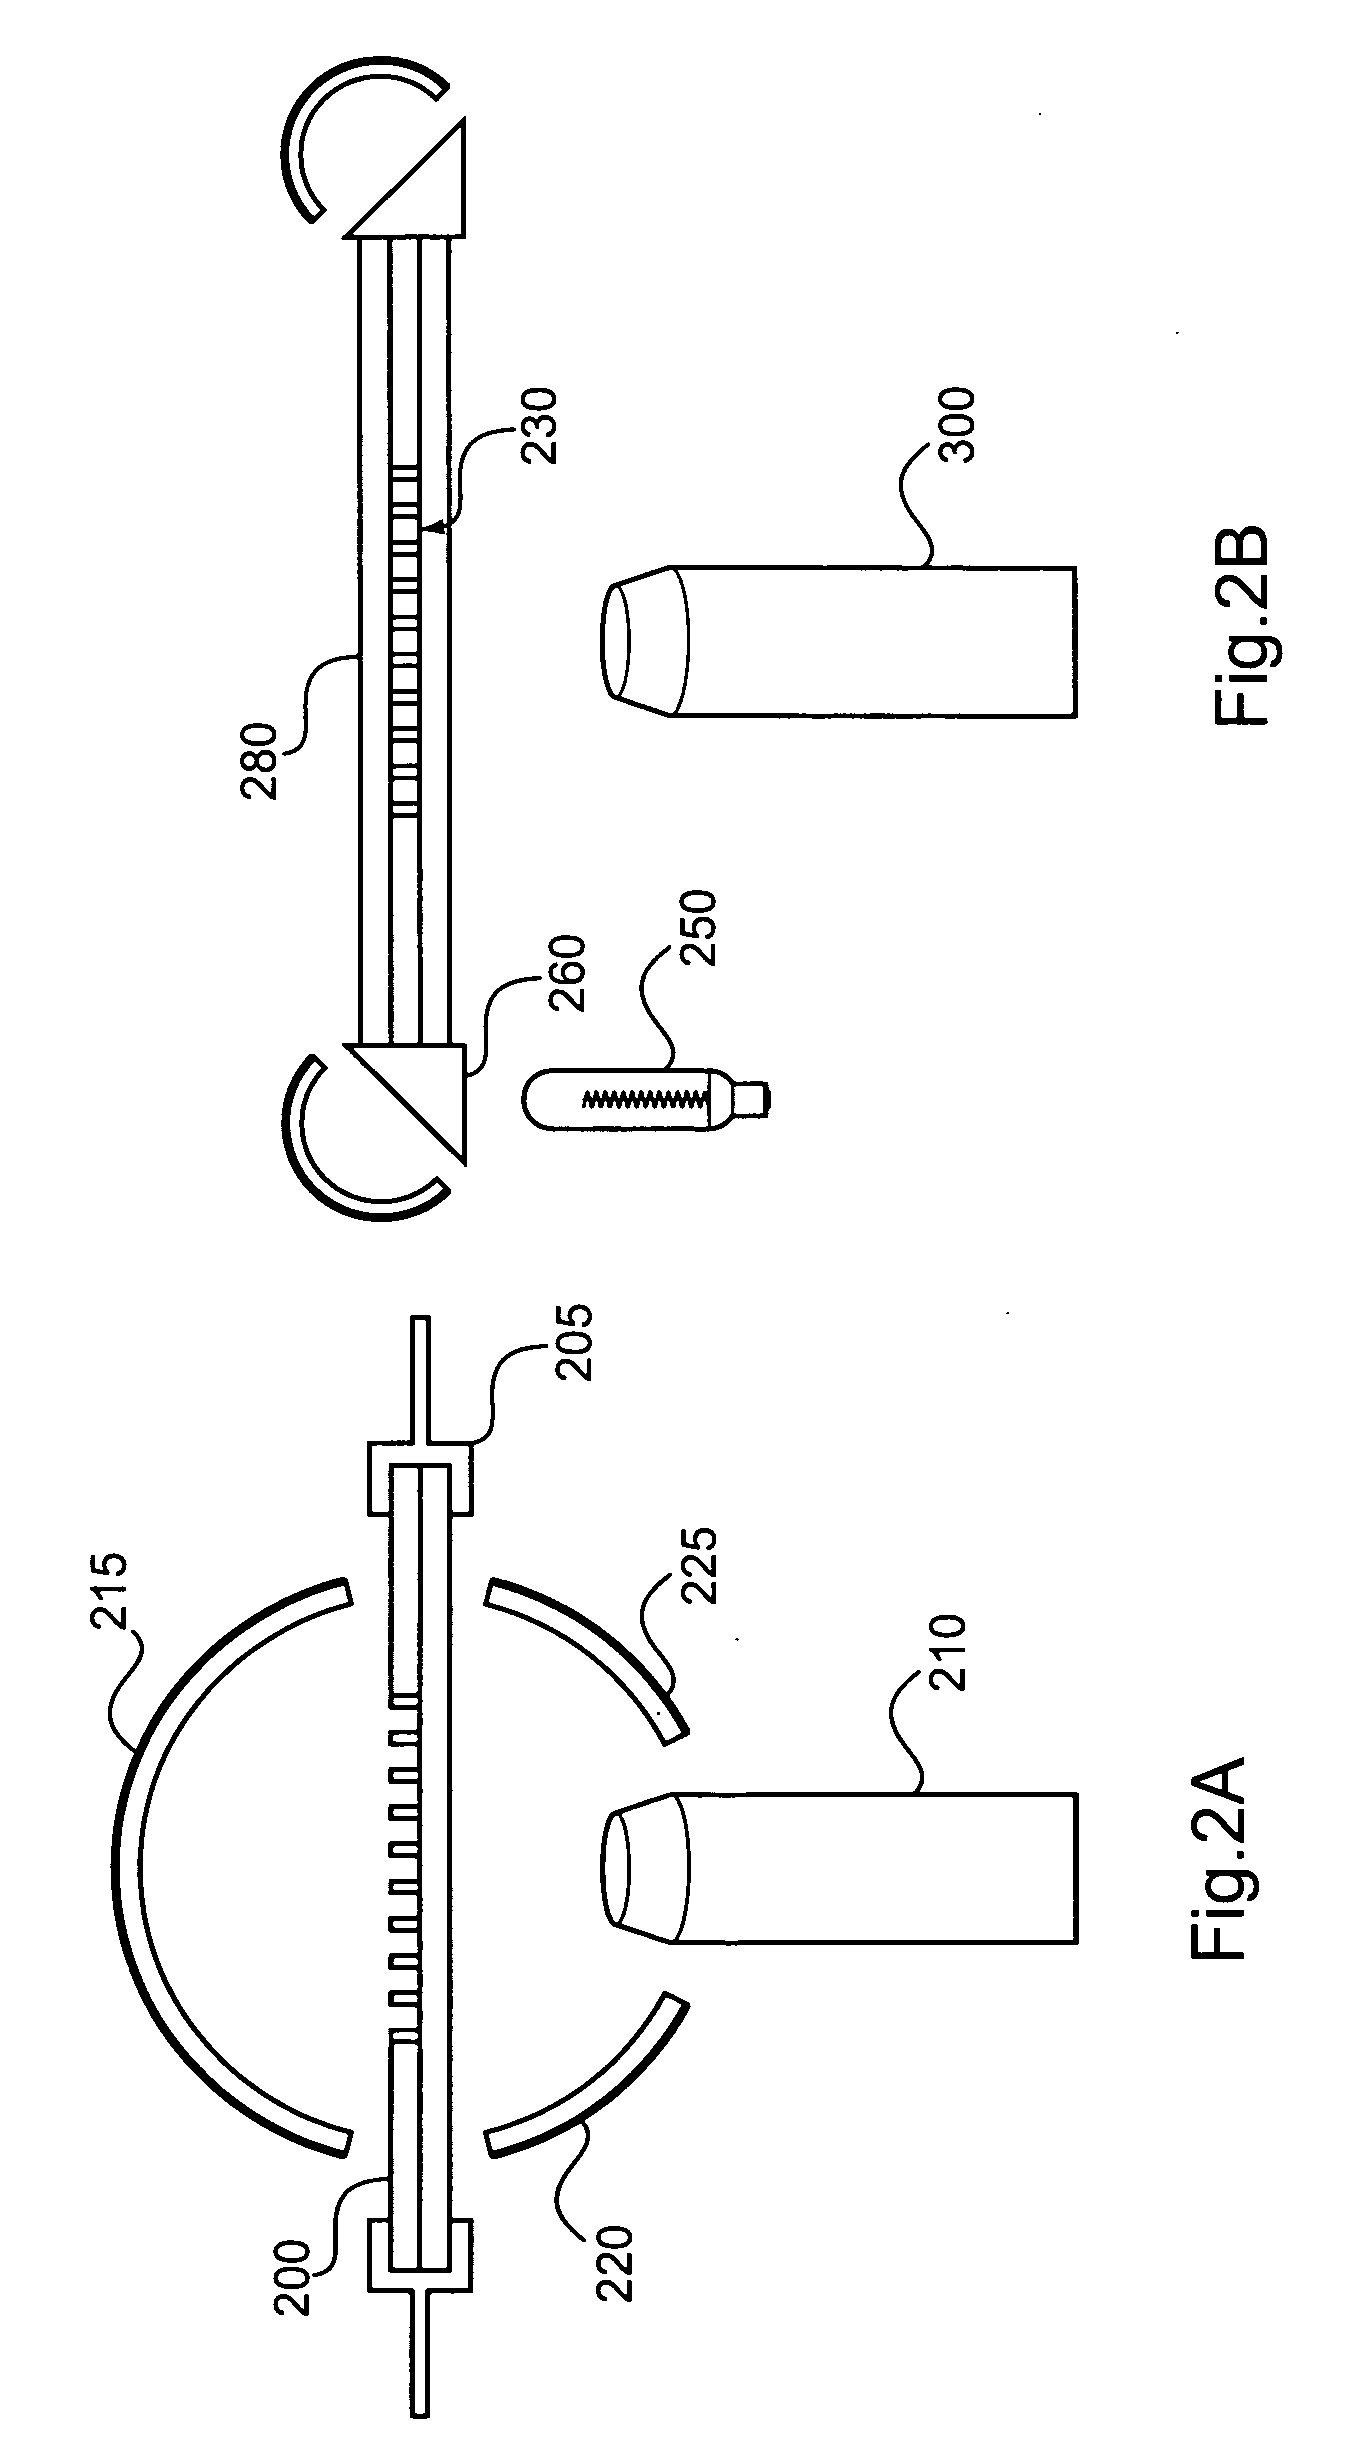 Systems and methods for enhancing fluorescent signals